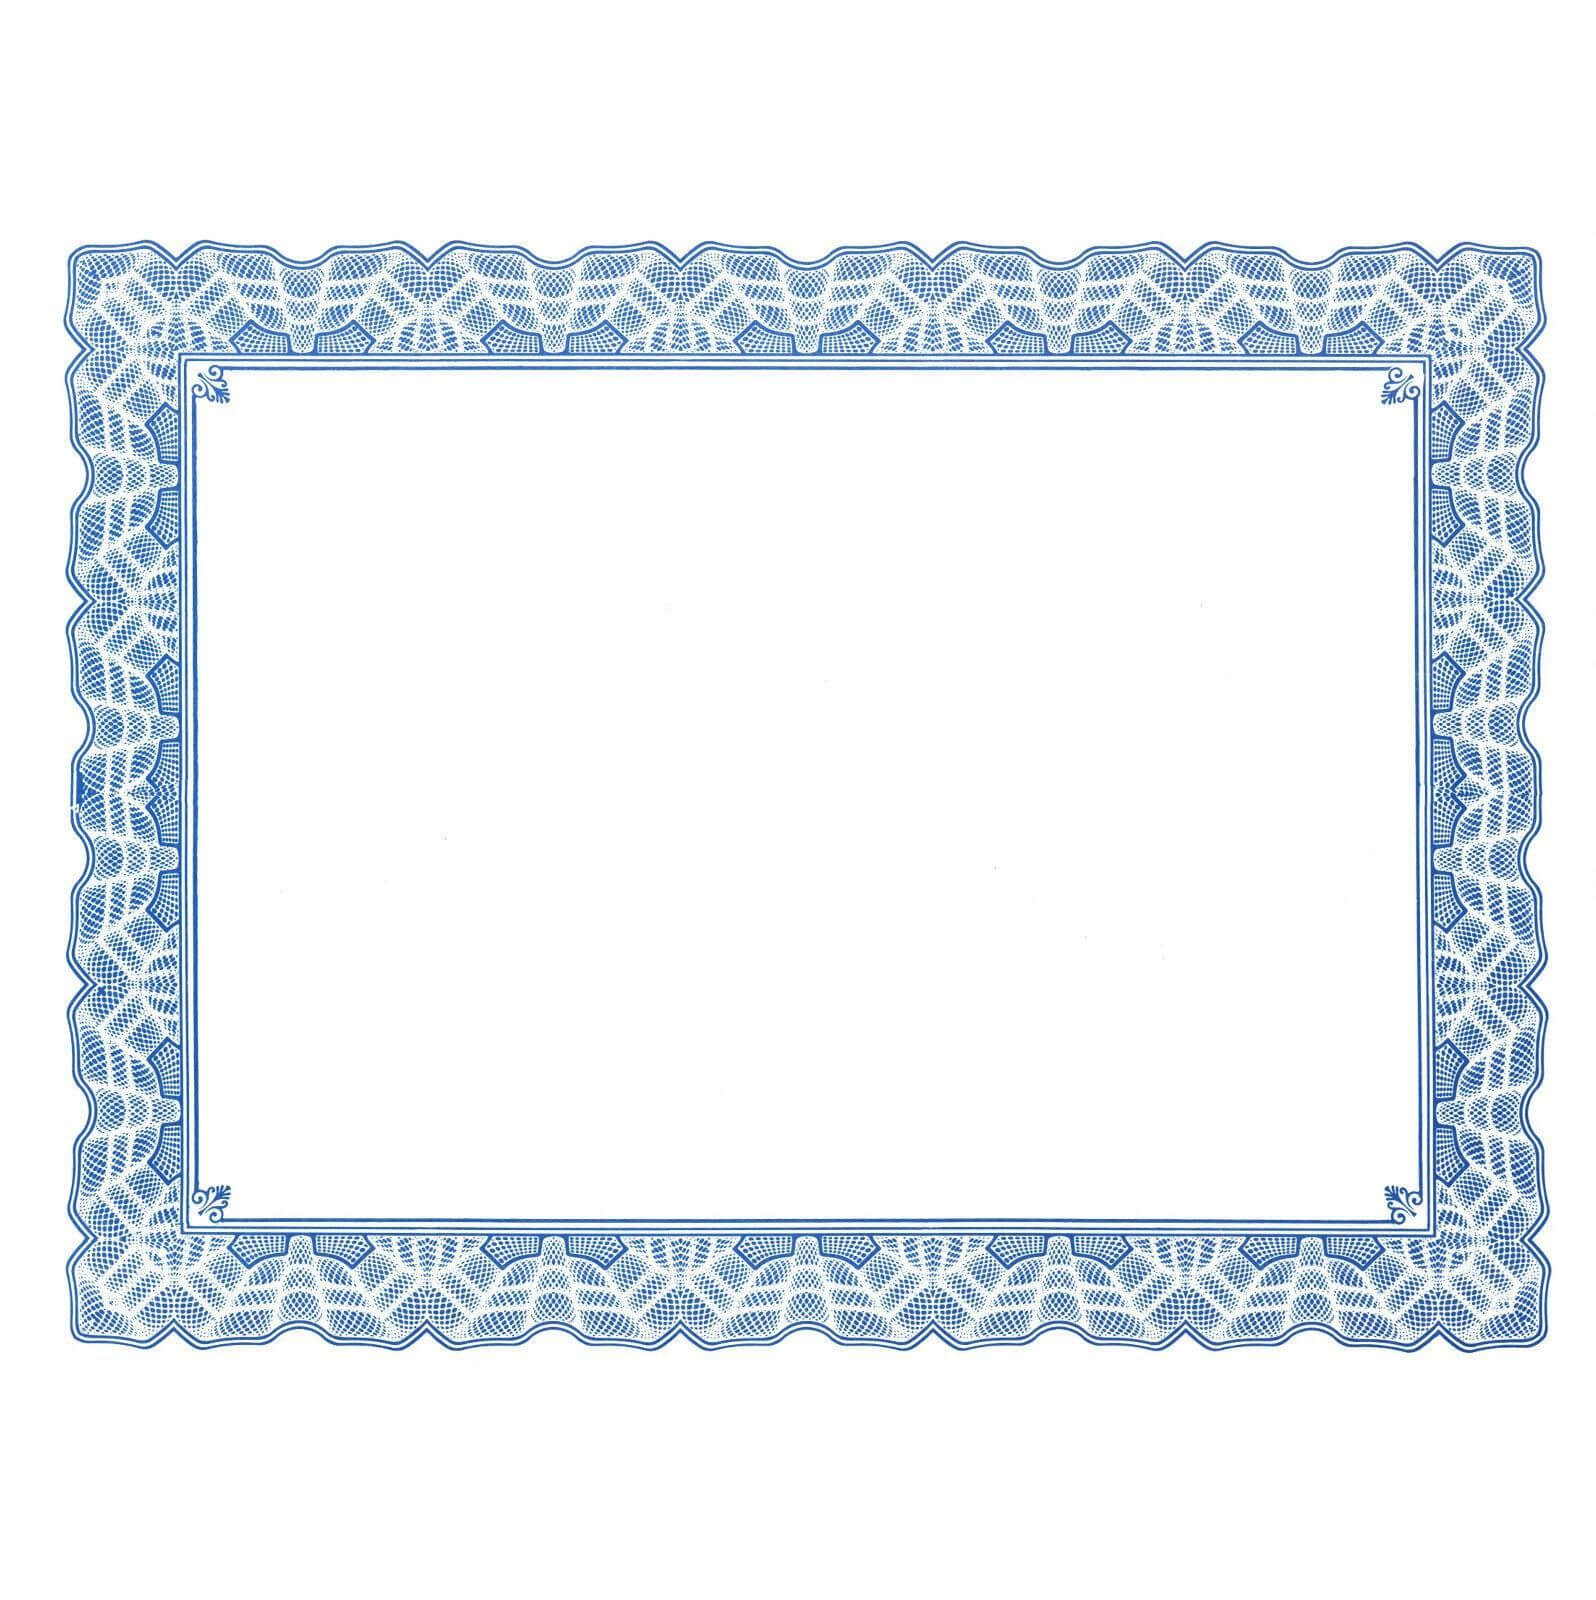 Certificate Border Templates For Word  In 2019 In Free Printable Certificate Border Templates